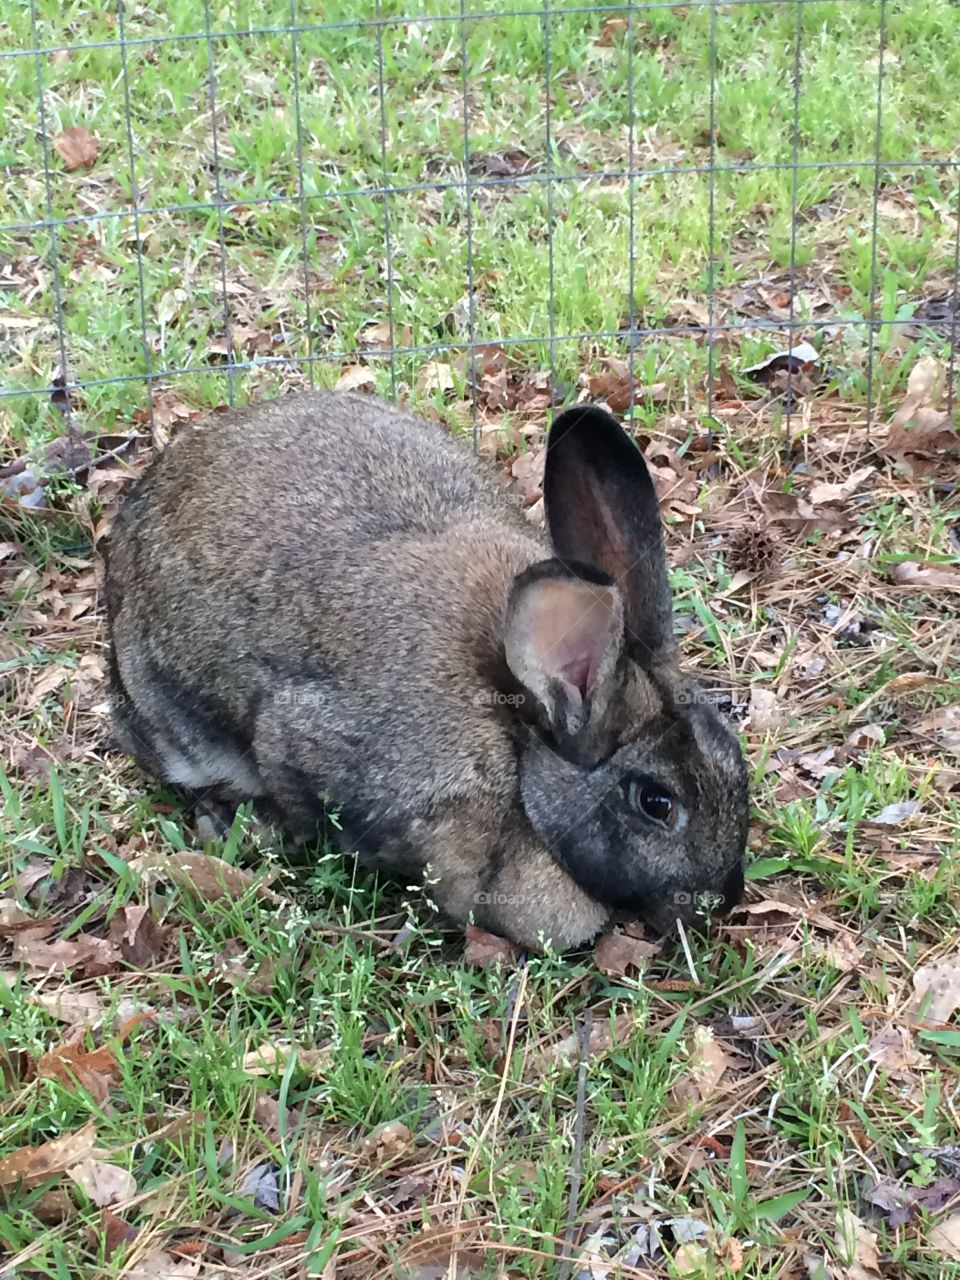 Giant Flemish rabbit nibbling on some grass